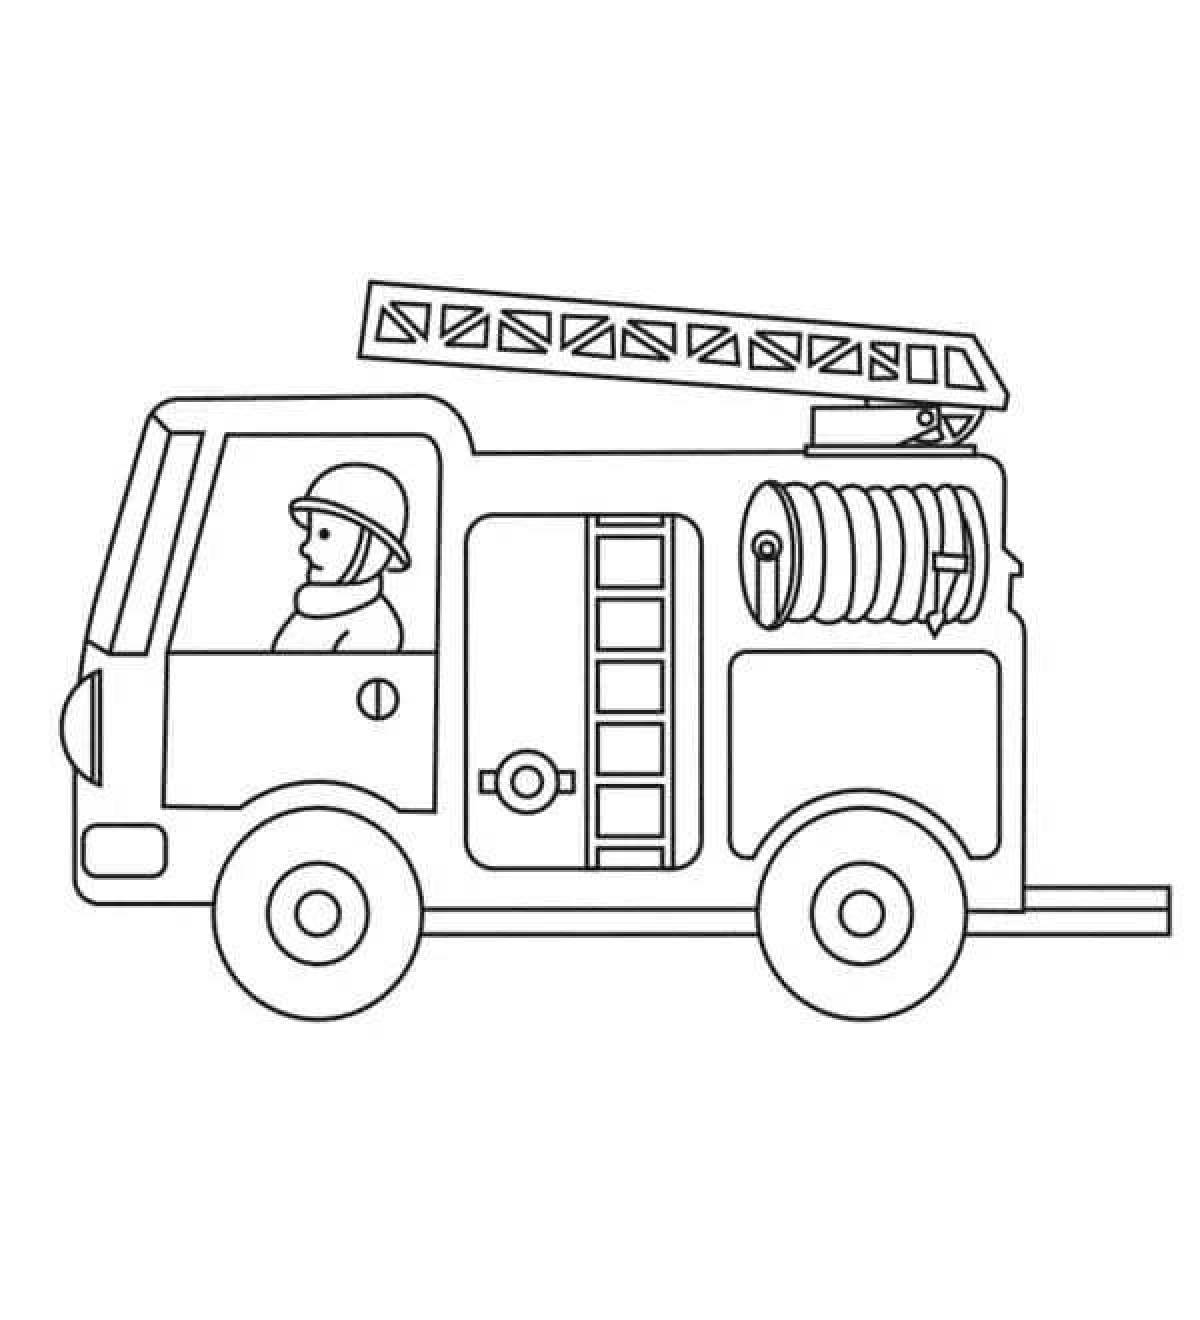 Fantastic fire truck coloring page